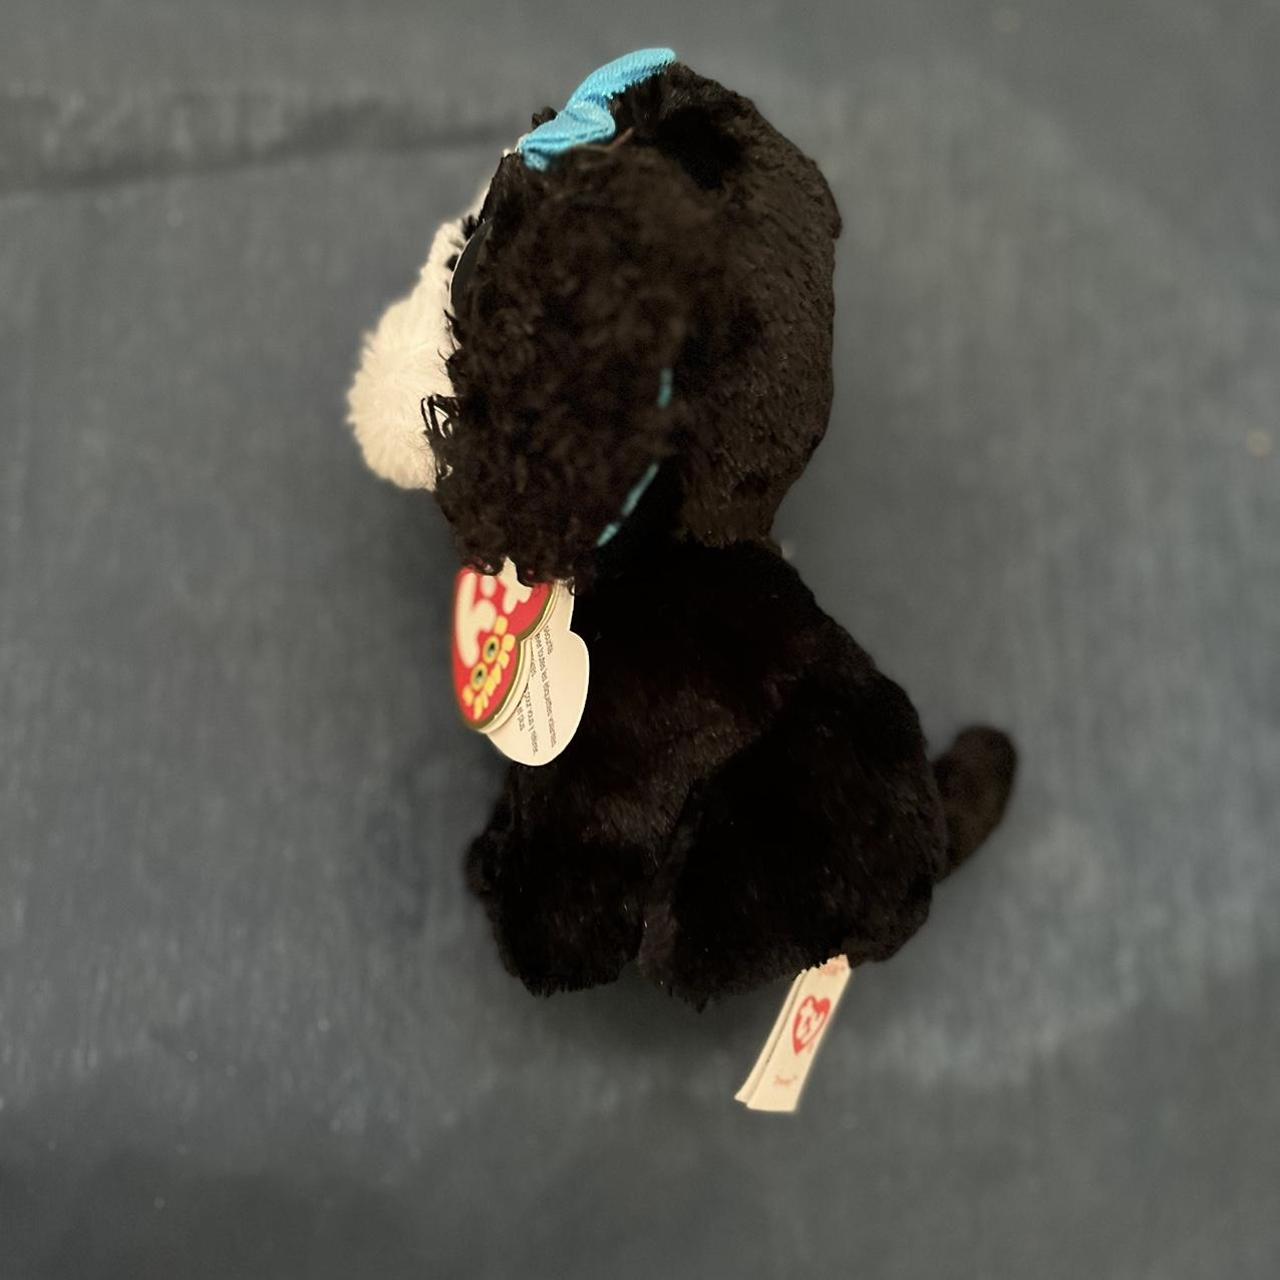 Ty - Beanie Boo Tracey - Black/White Dog Med